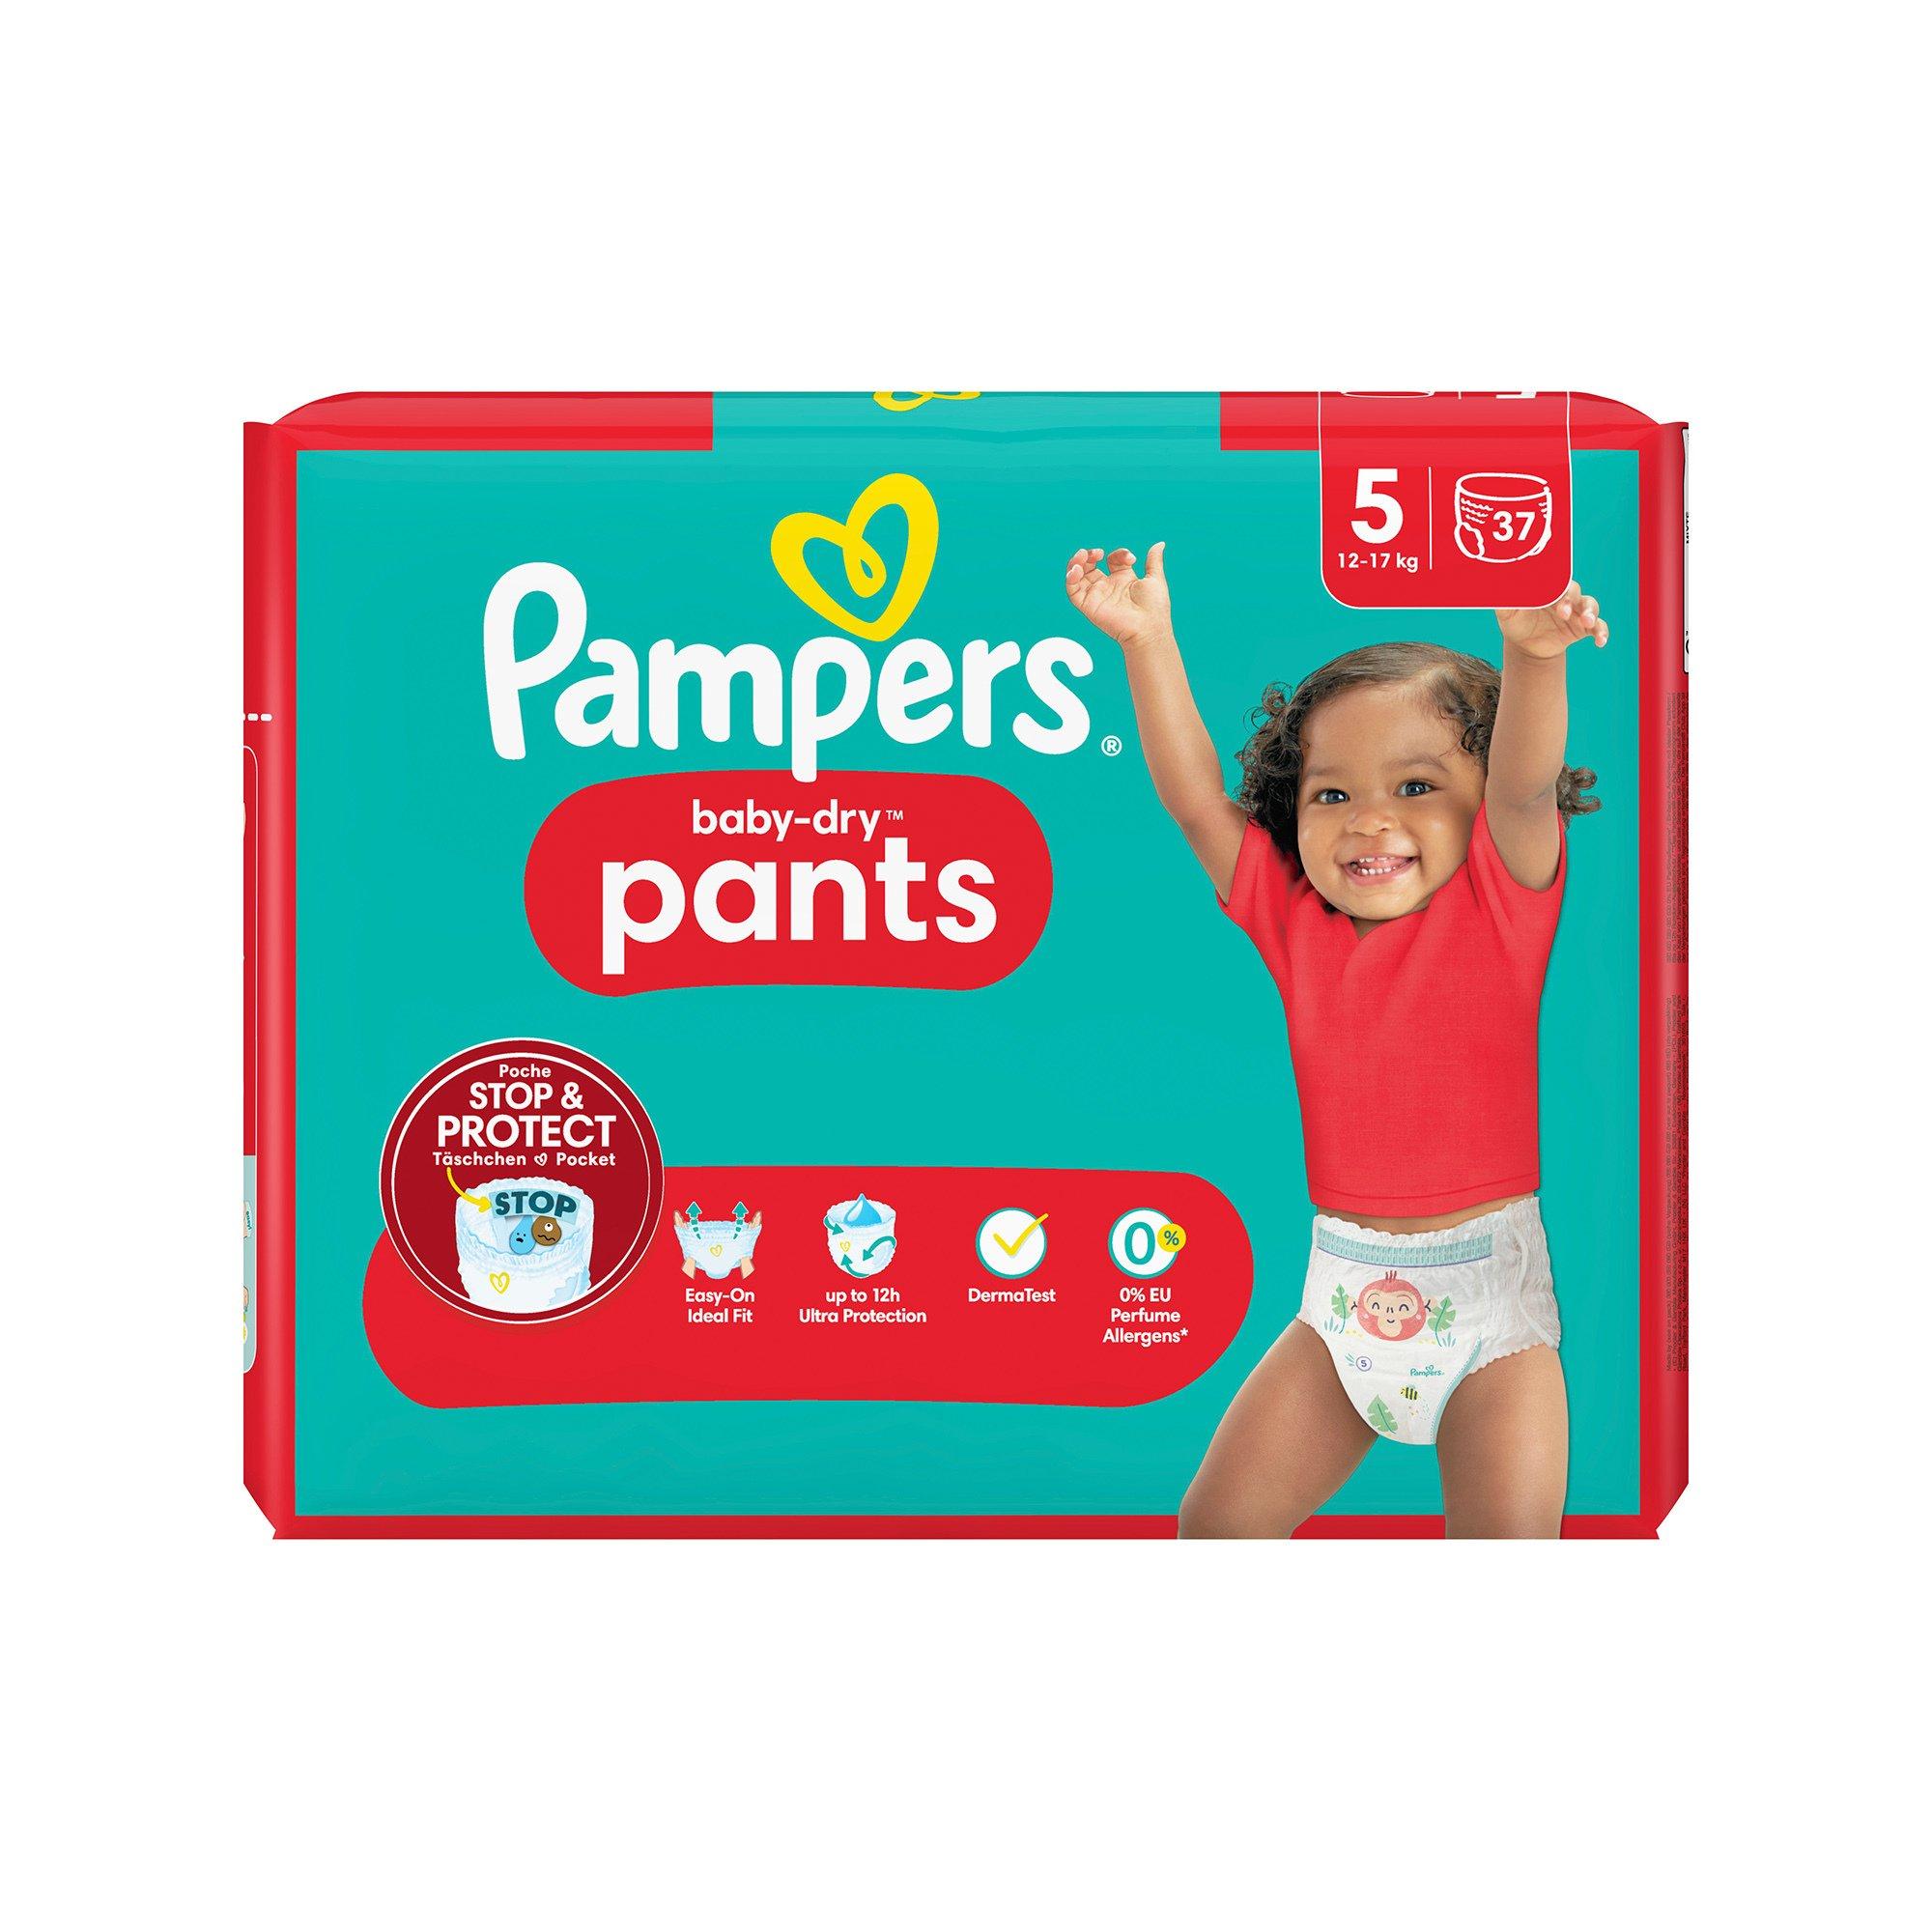 Pampers Baby Dry Pants Gr.5 Junior 12-17kg Sparpack Baby-Dry Pants Taglia 5, confezione economica 